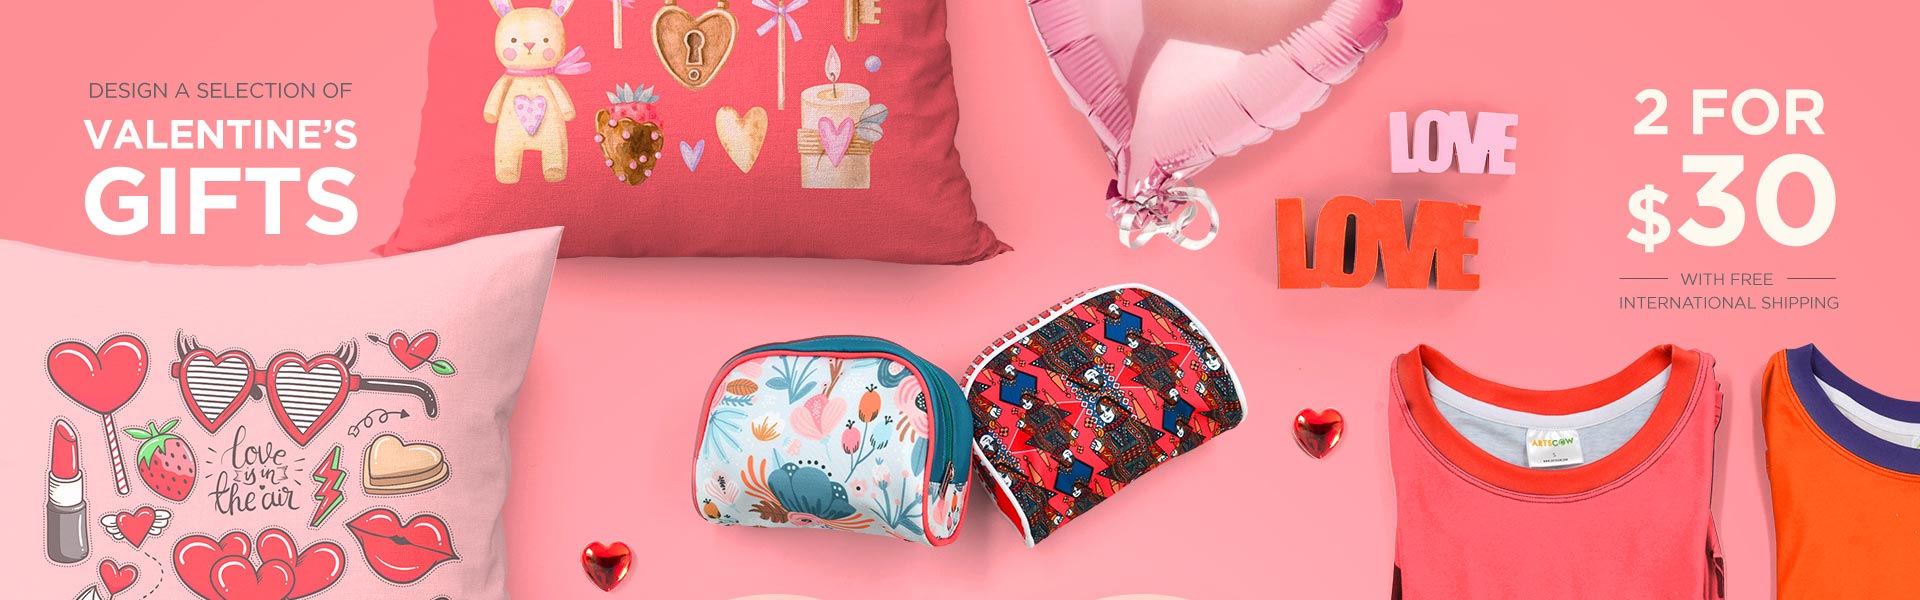 Design a selection of Valentine’s Gifts: 2 for $30 with Free International Shipping